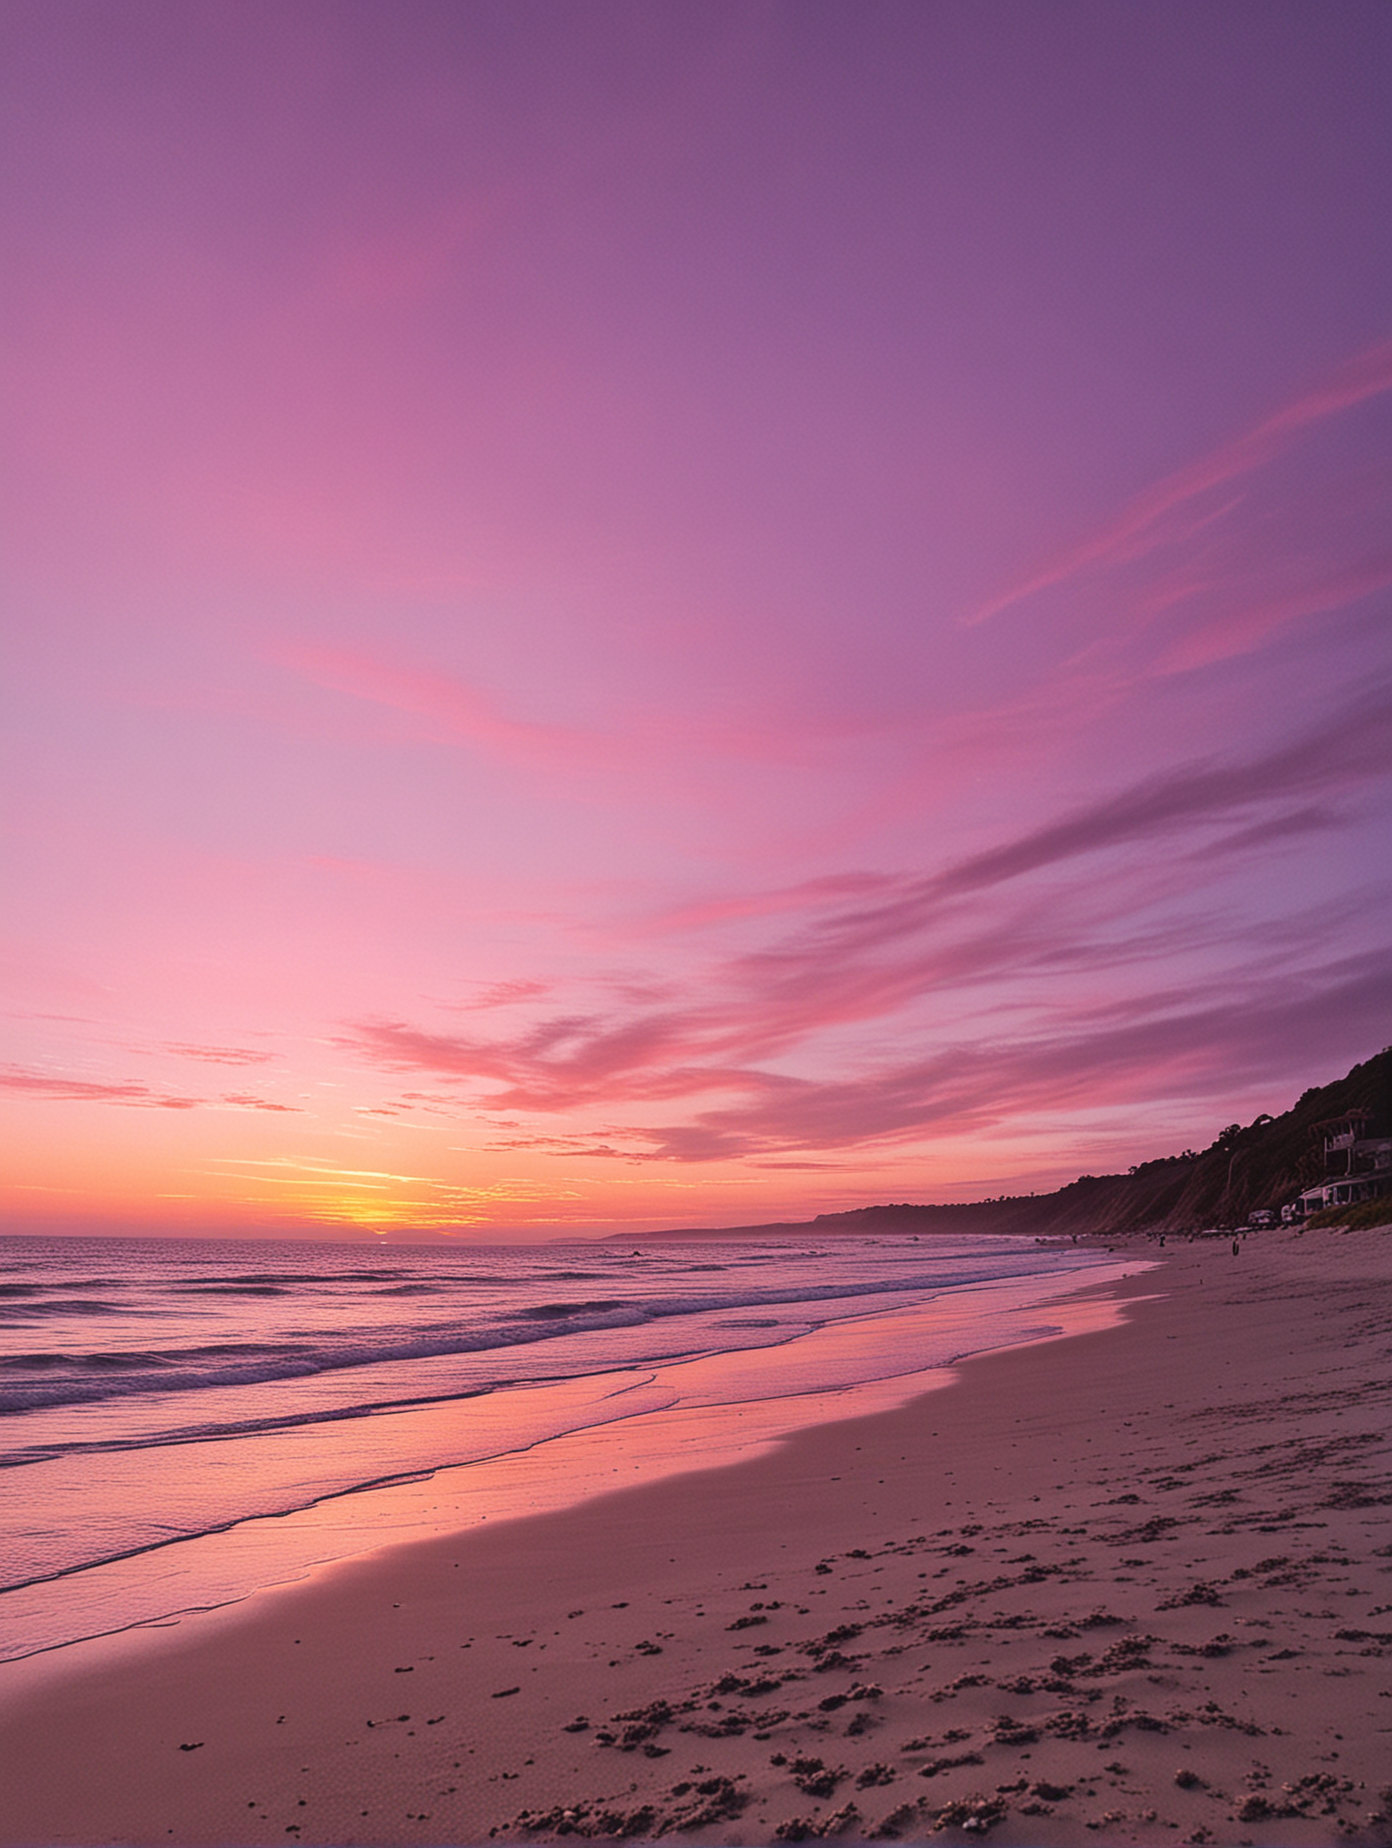 beach sunset with pink and purple skies
